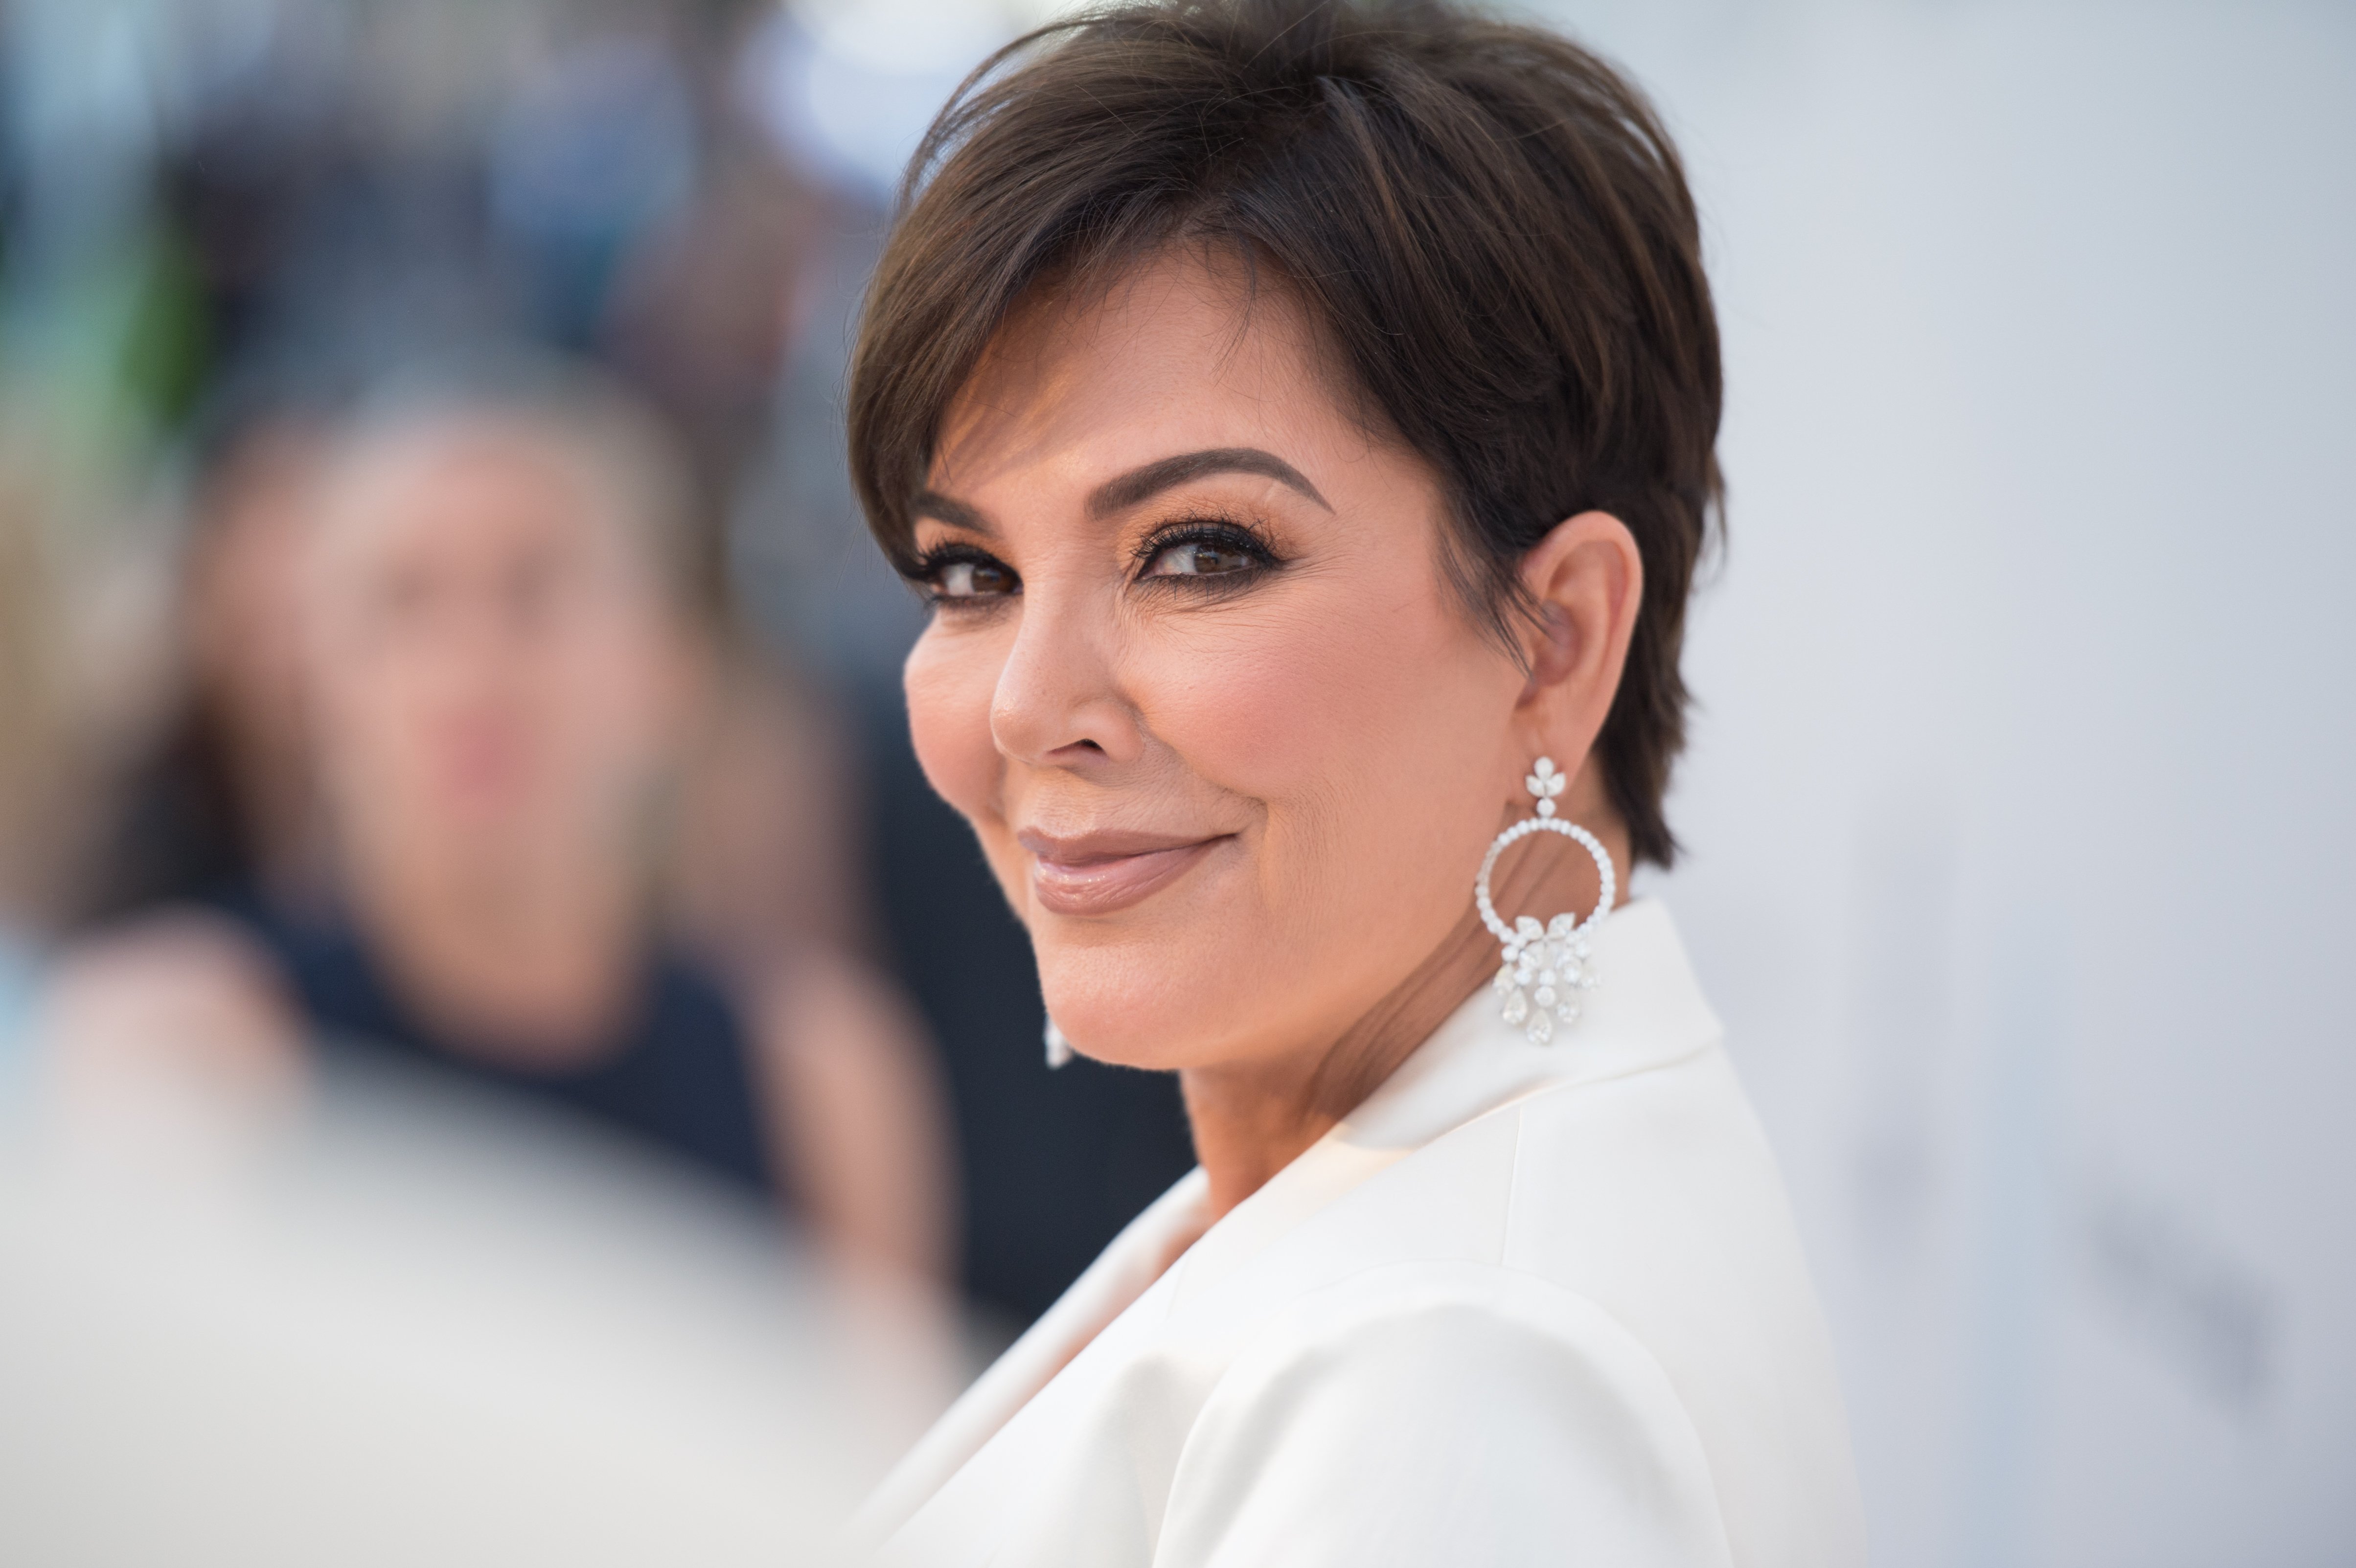 Kris Jenner pictured at the amfAR Cannes Gala 2019, Cap d'Antibes, France. | Photo: Getty Images